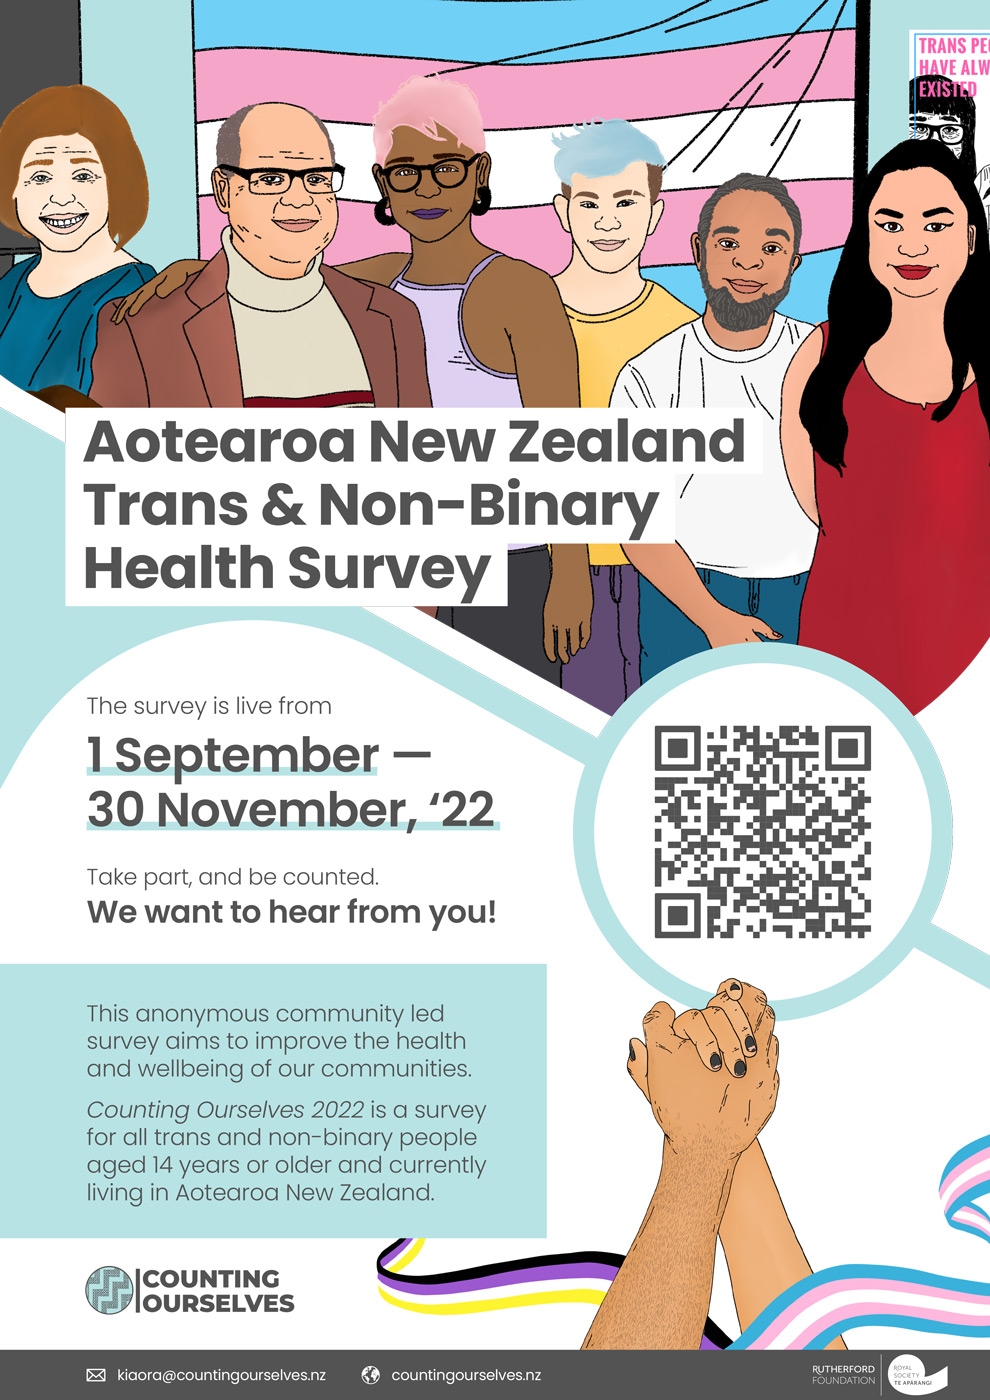 A diverse group of trans and non-binary people are smiling in front of a large trans flag. Below are details about the Counting Ourselves survey, including that it is open until 30 November 2022 and a QR code that links to the survey. The image at the bottom is of two clasped hands with ribbons in the colours of the trans and the non-binary flags.